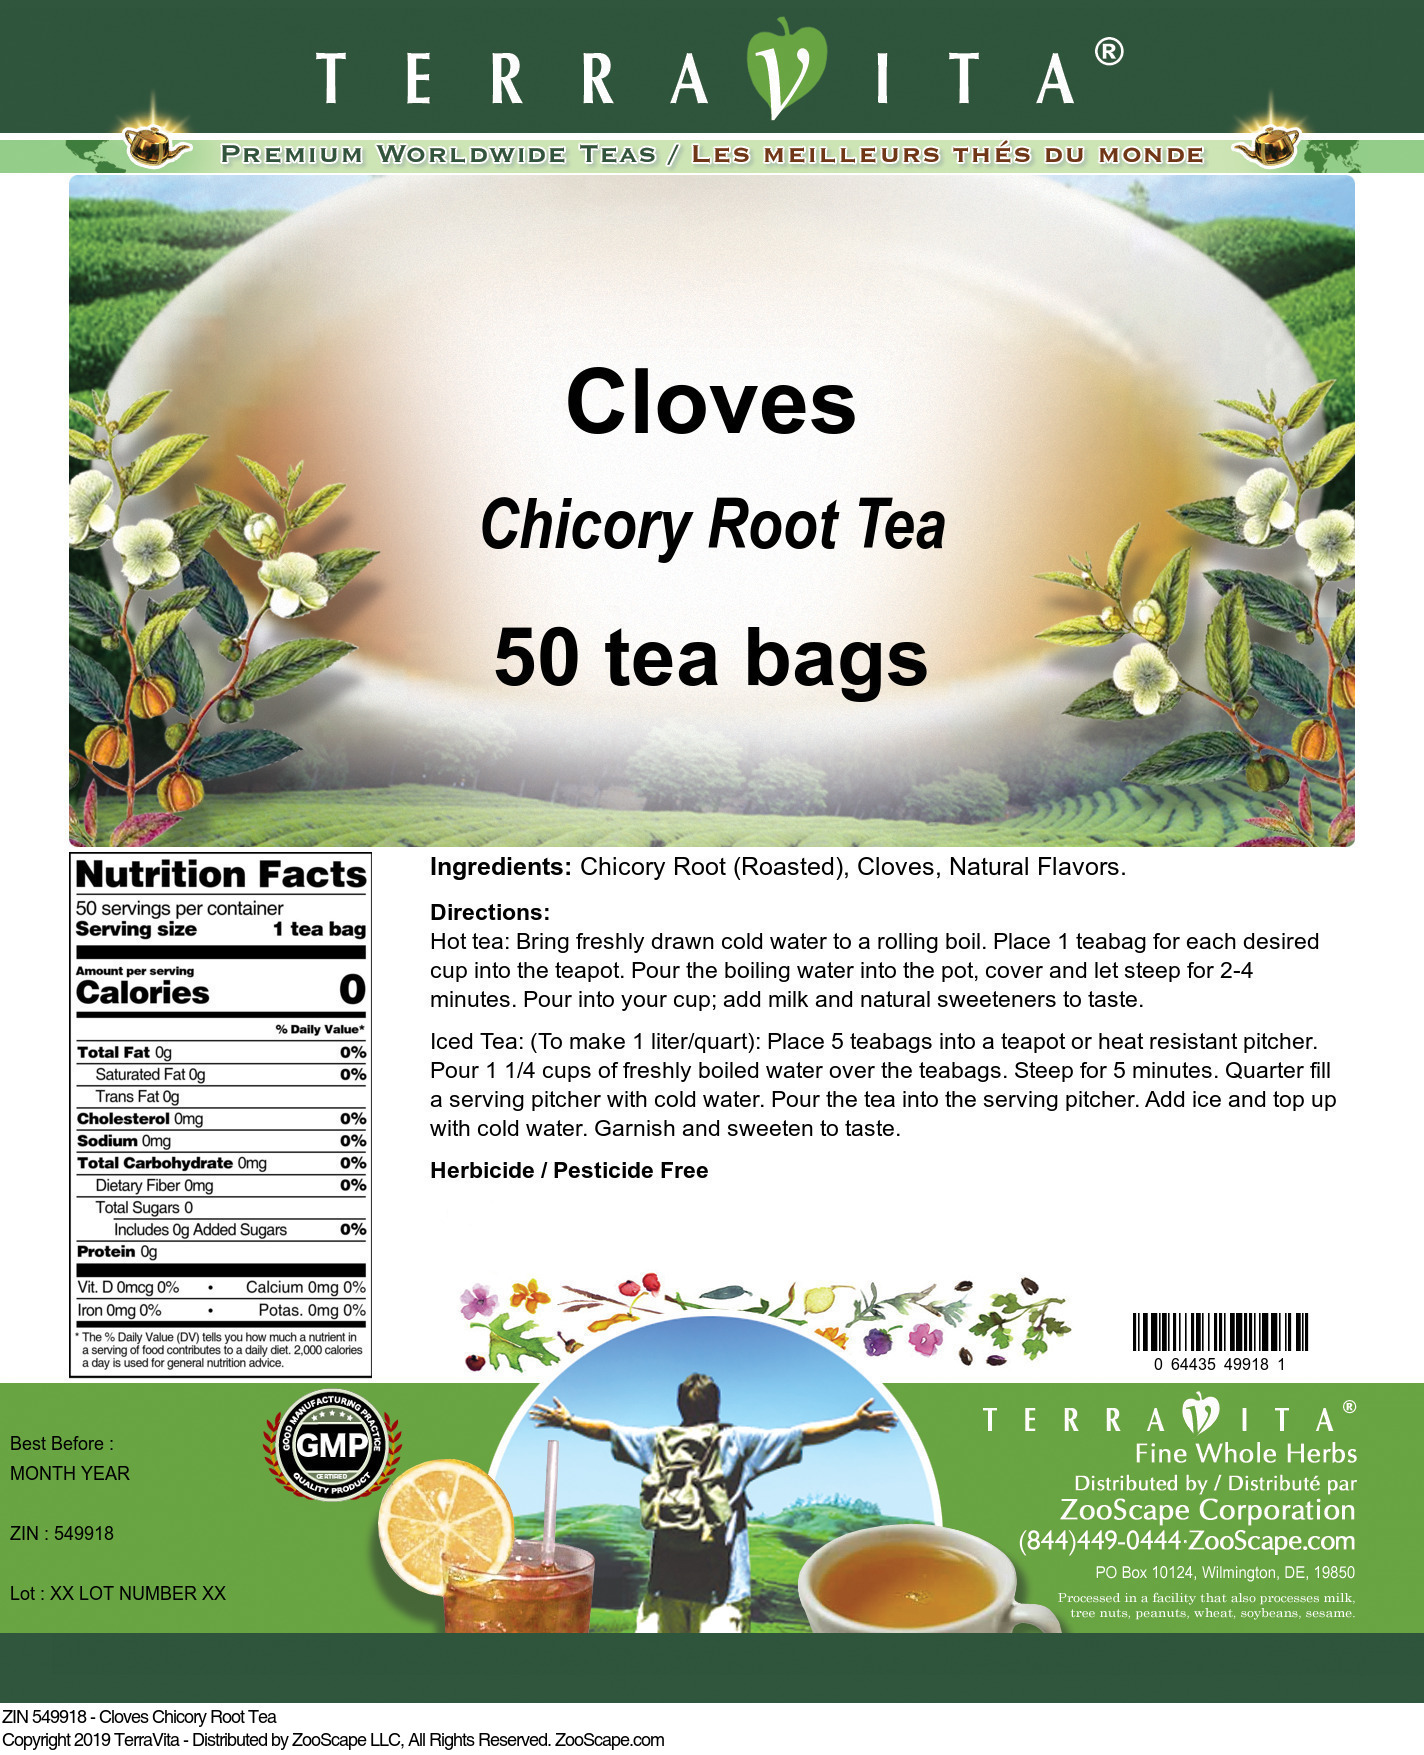 Cloves Chicory Root Tea - Label